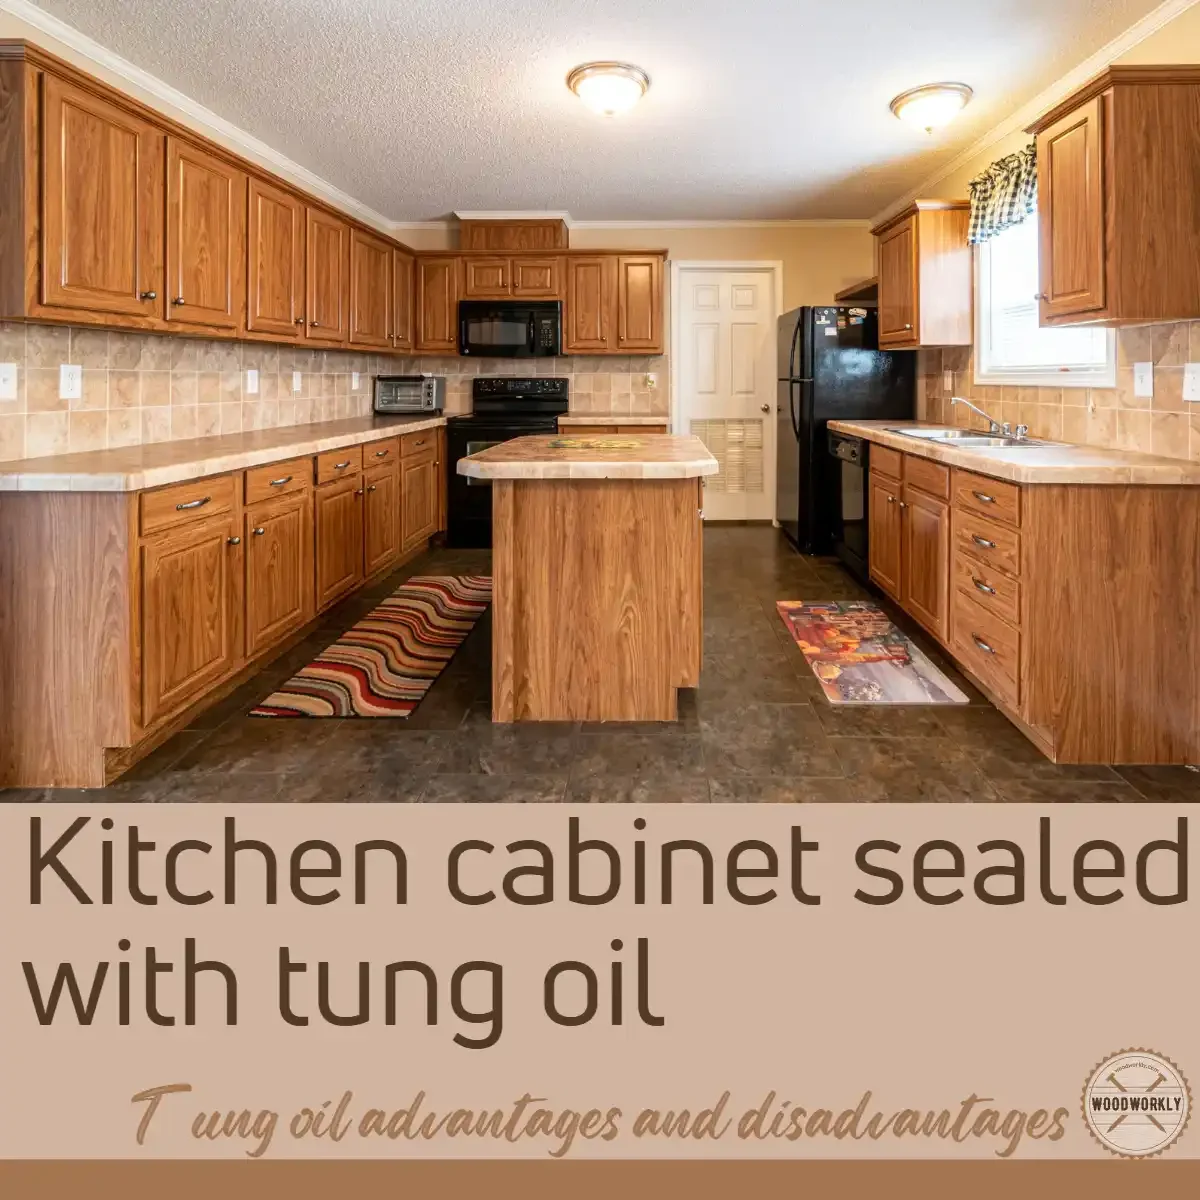 kitchen cabinet sealed with tung oil